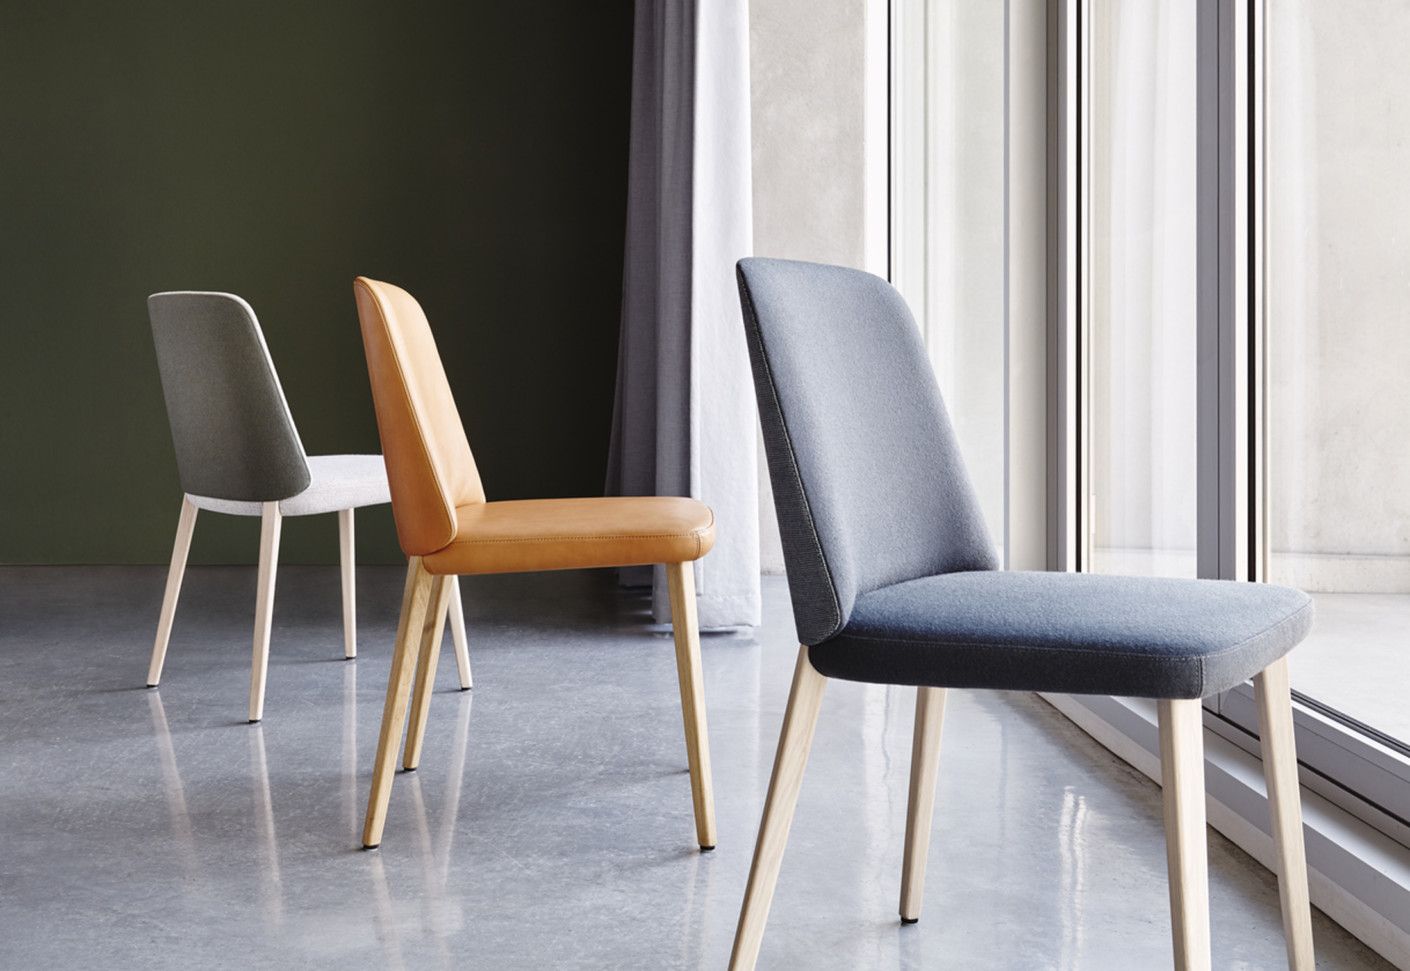 BACK ME UP Chairs by Arian Brekveld for Montis